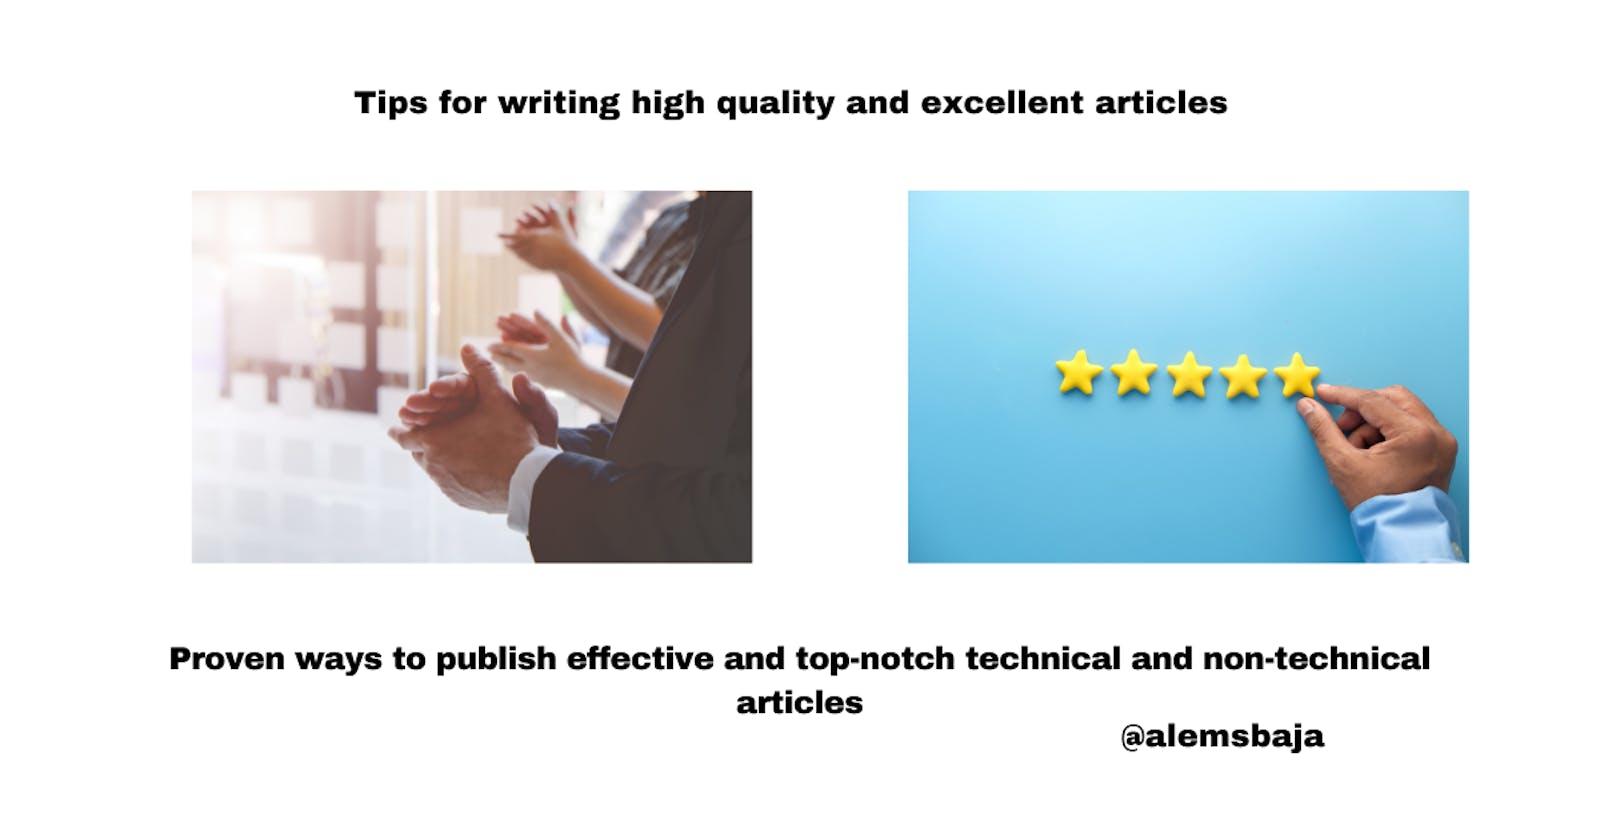 Tips for writing high quality and excellent articles